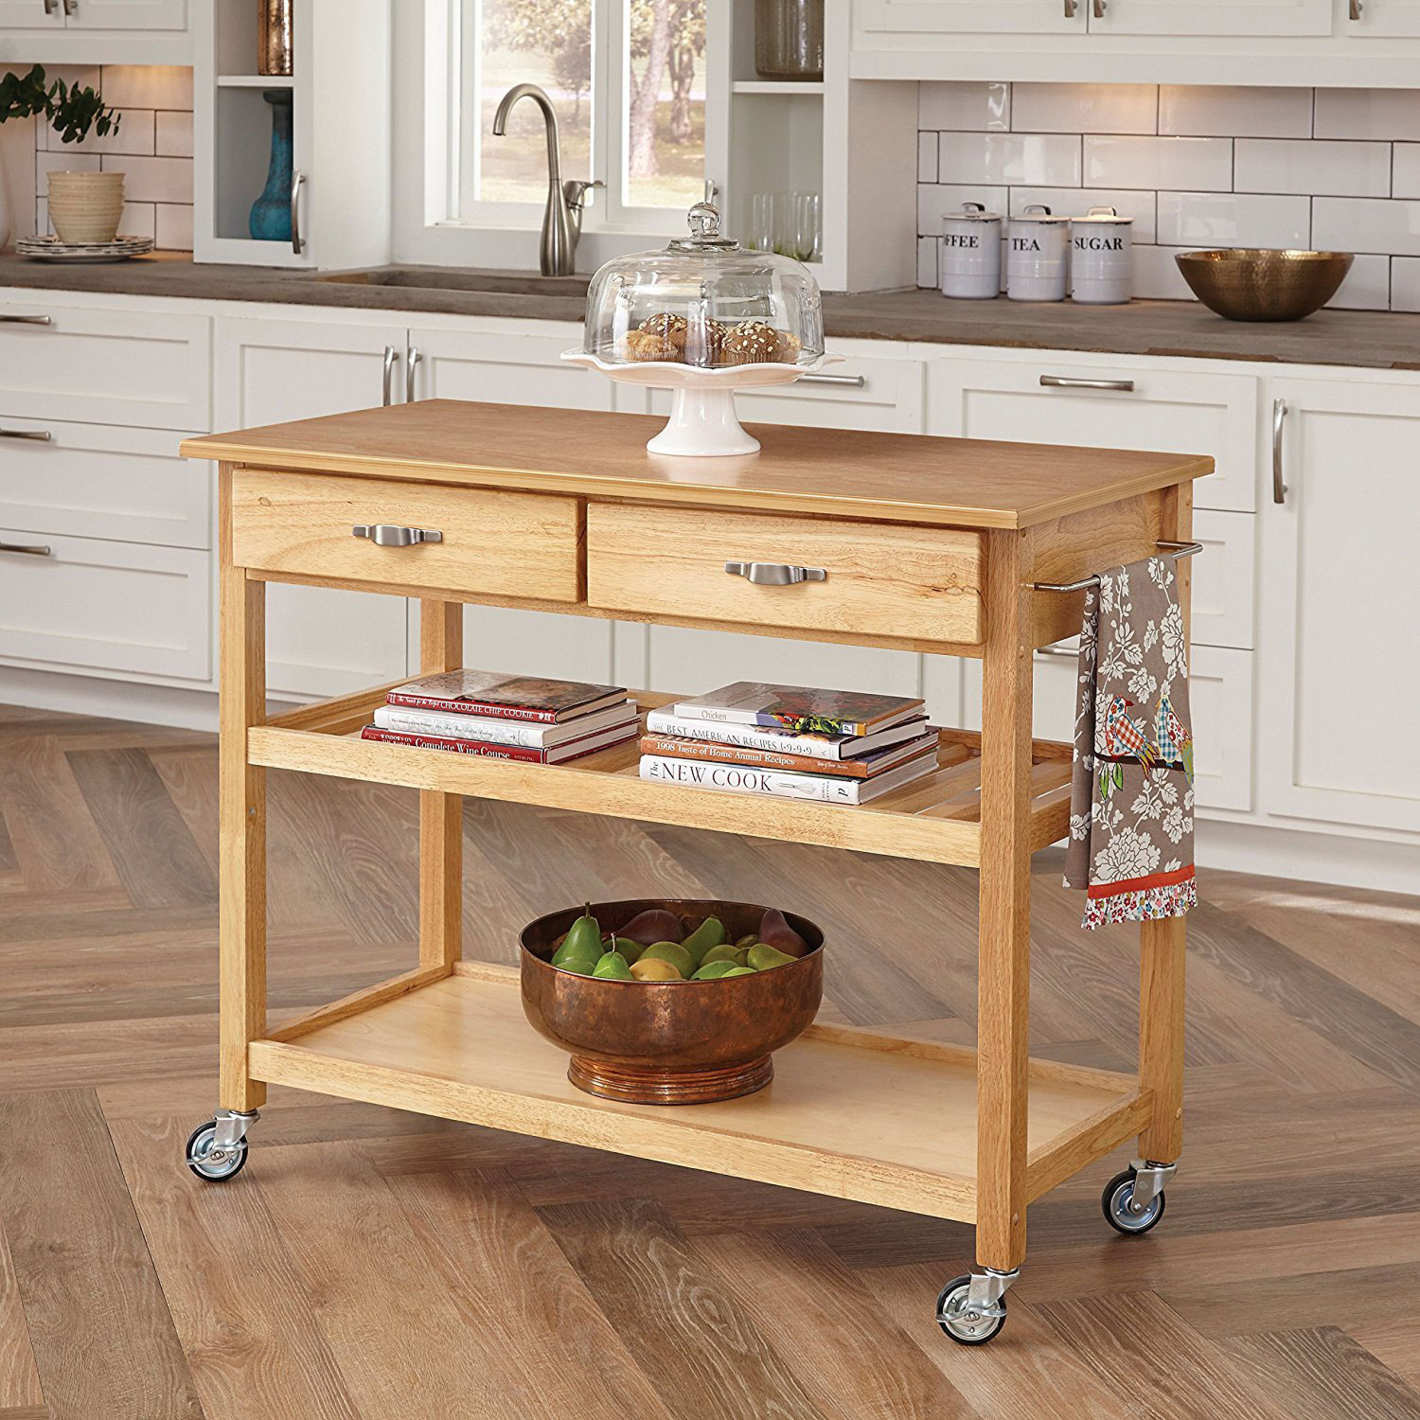 Home Styles 5216-95 Solid Wood Top Kitchen Cart, Natural Finish